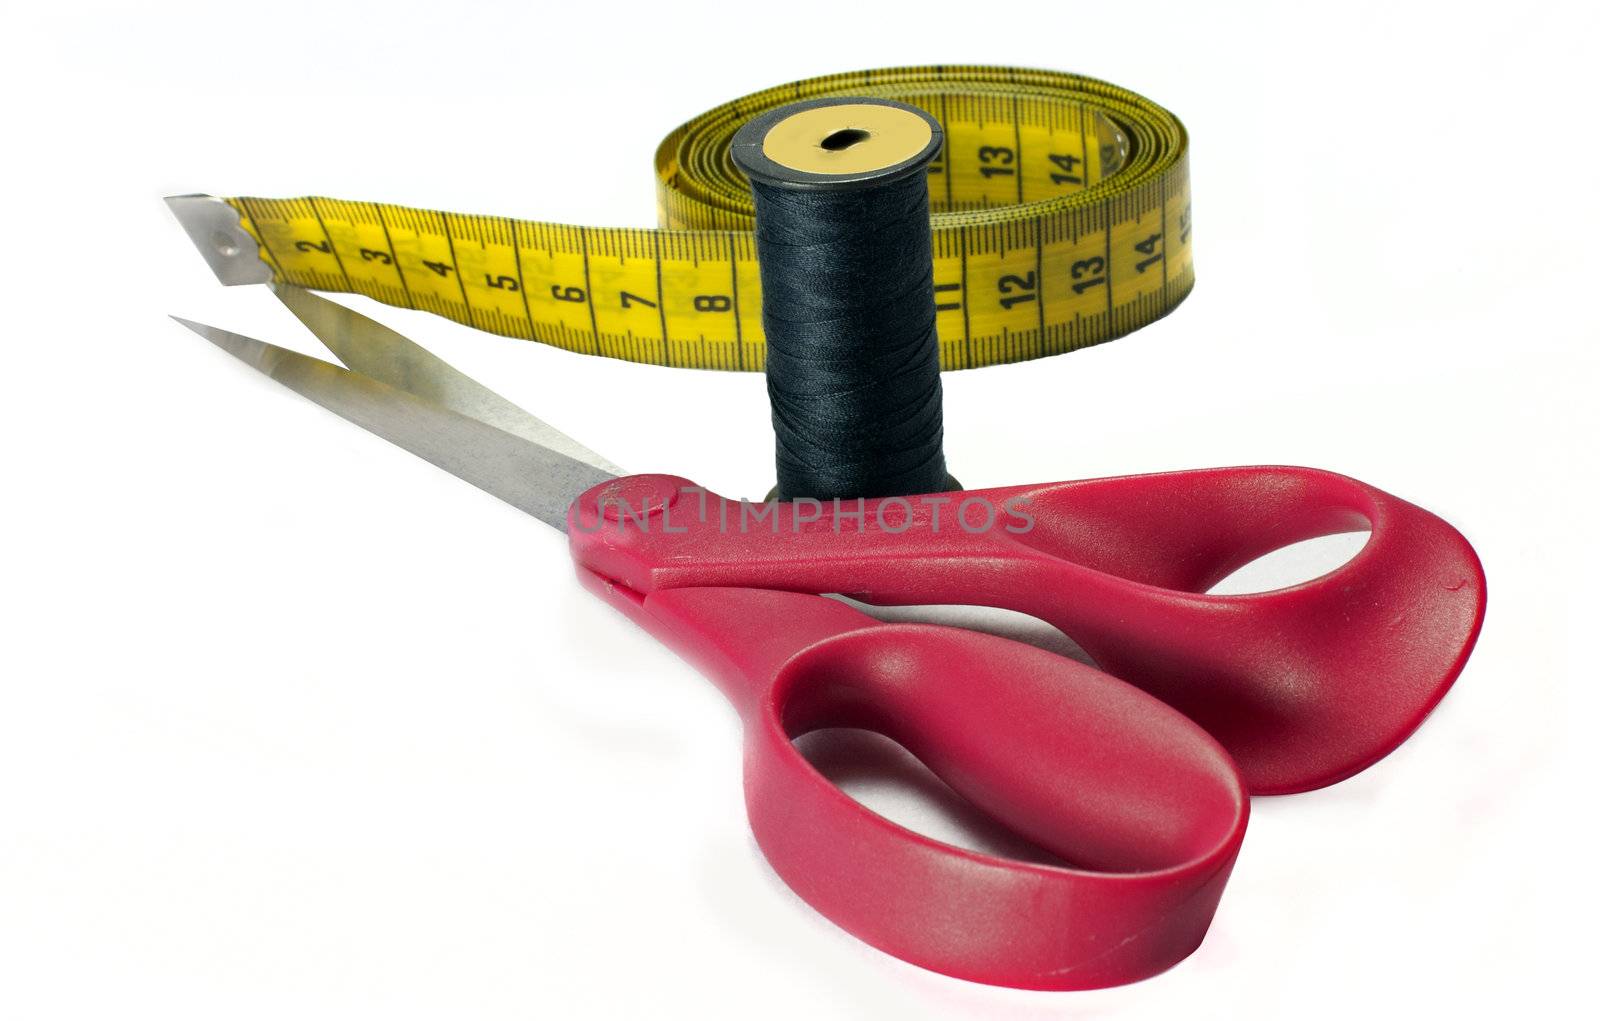 scissors and measurement tool by compuinfoto